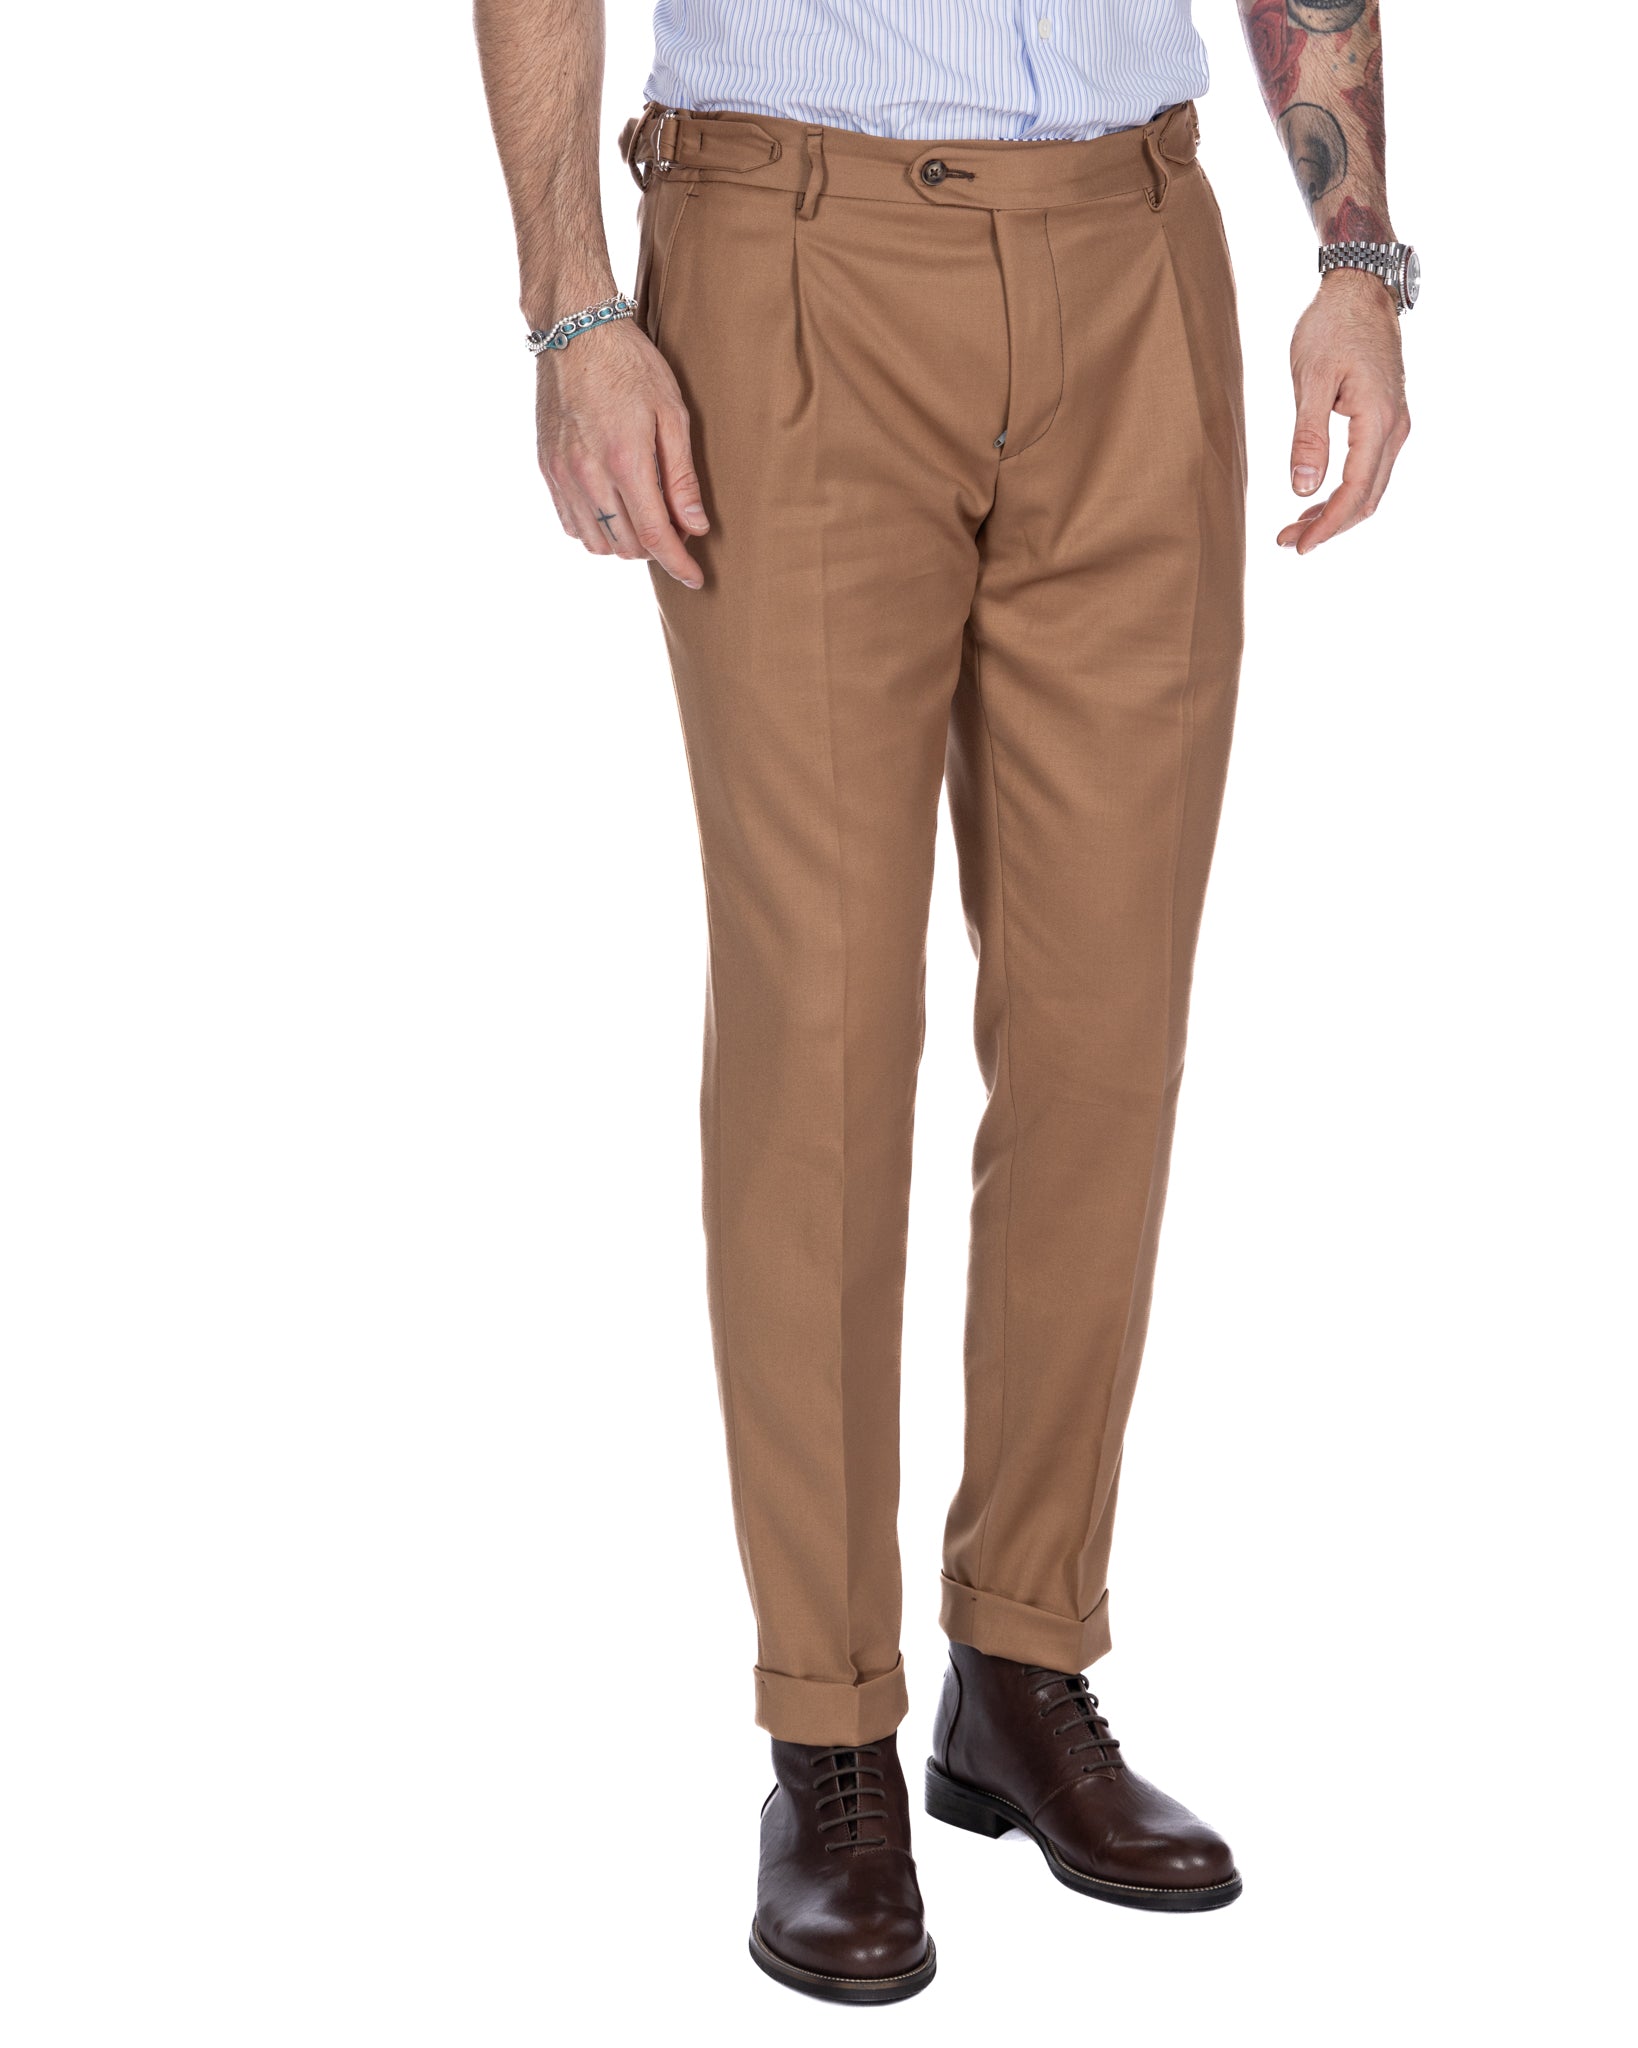 Monopoli - trousers with camel buckles